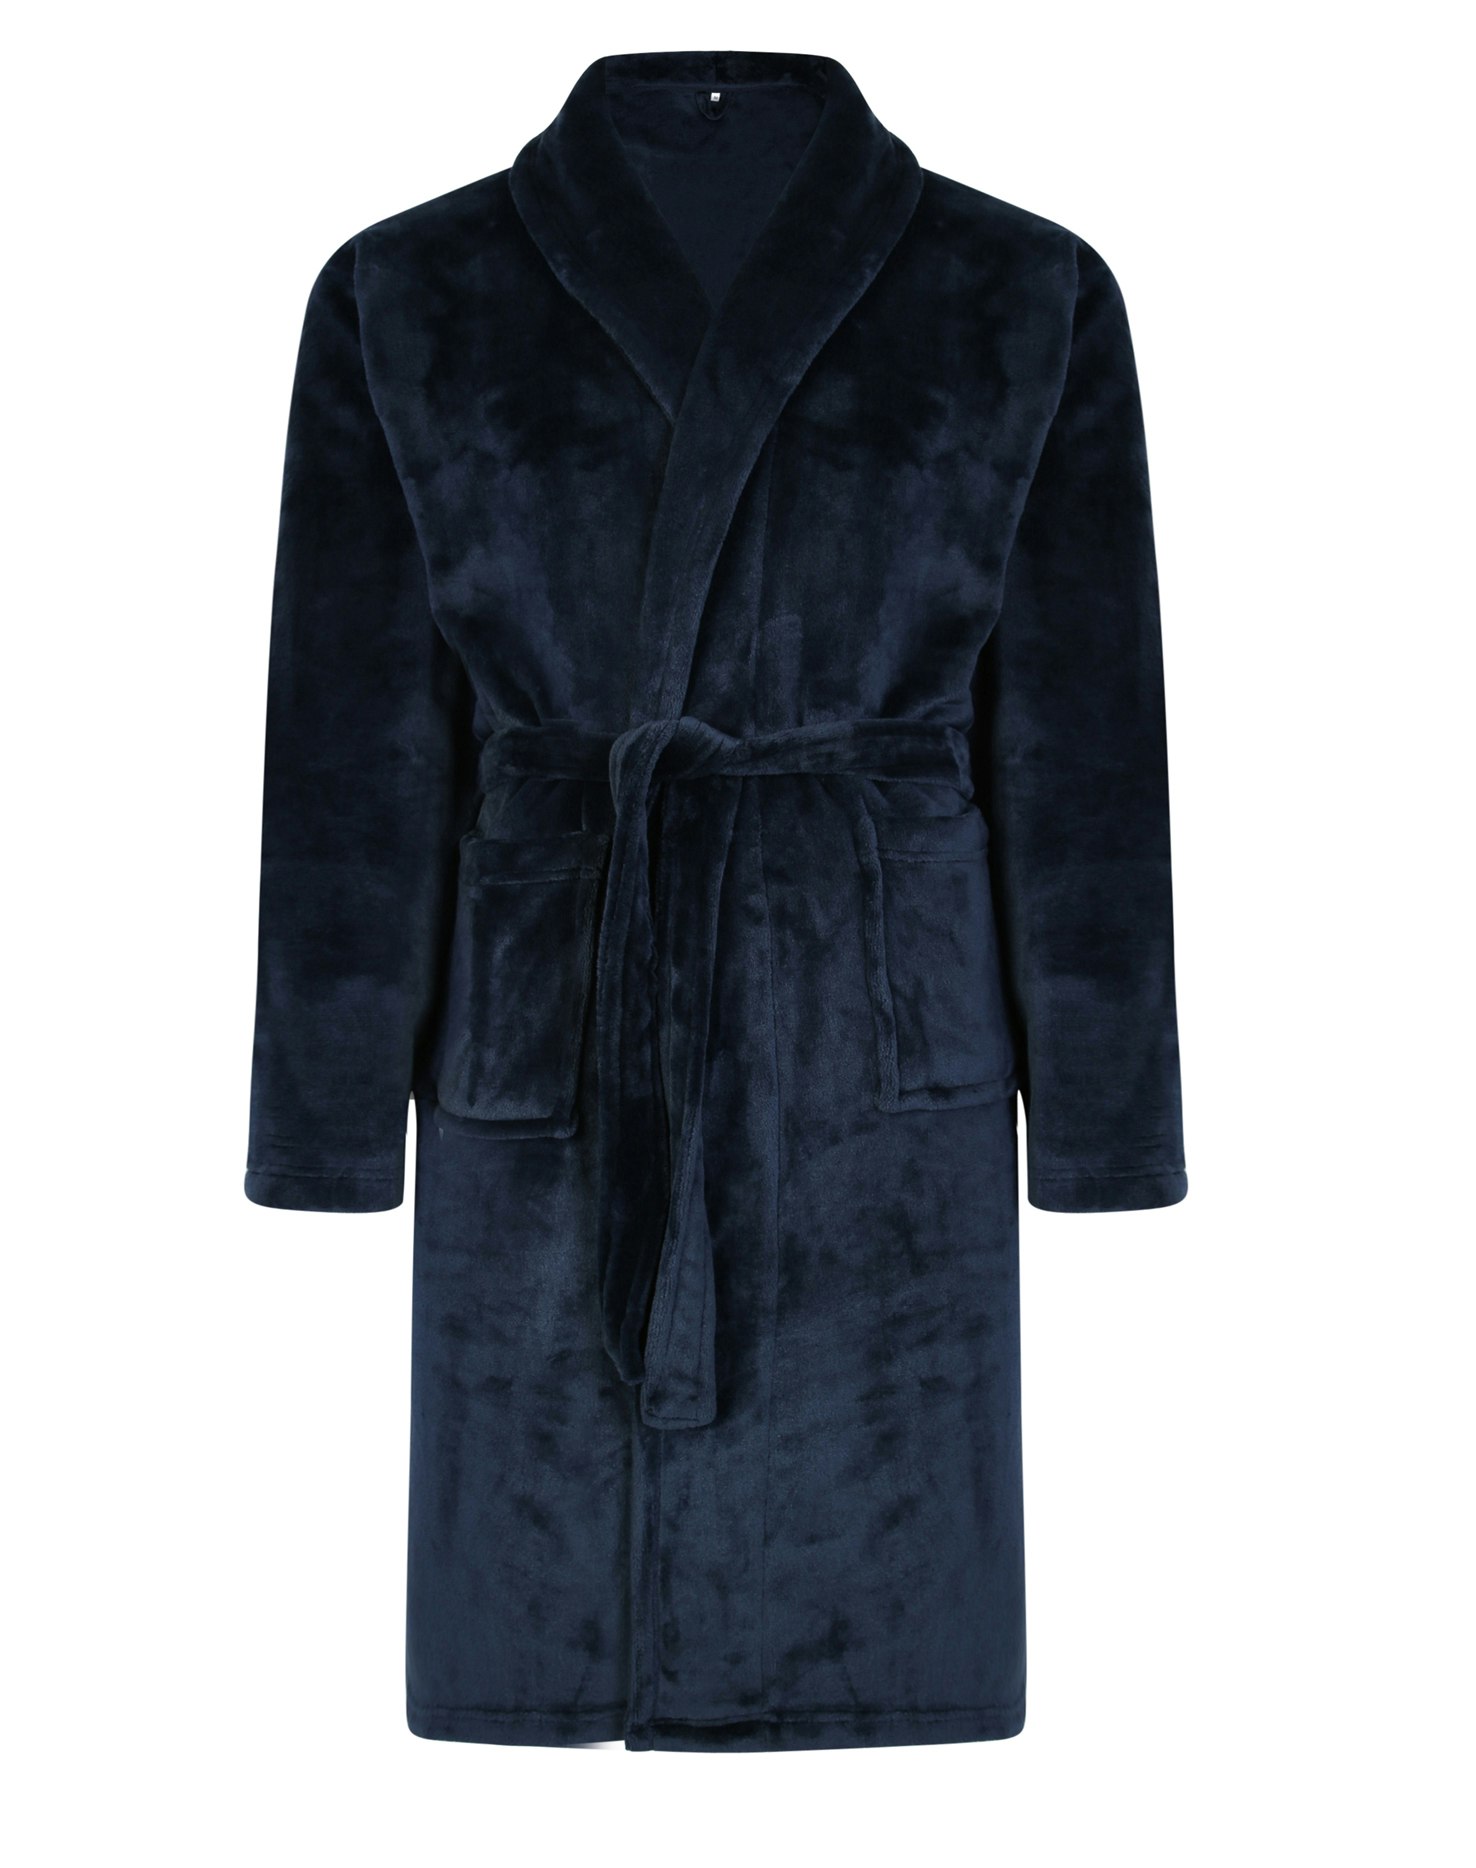 Luxury Mens NAVY Charcoal Thermal Coral Fleece Dressing Gowns soft Bath Robe  | eBay